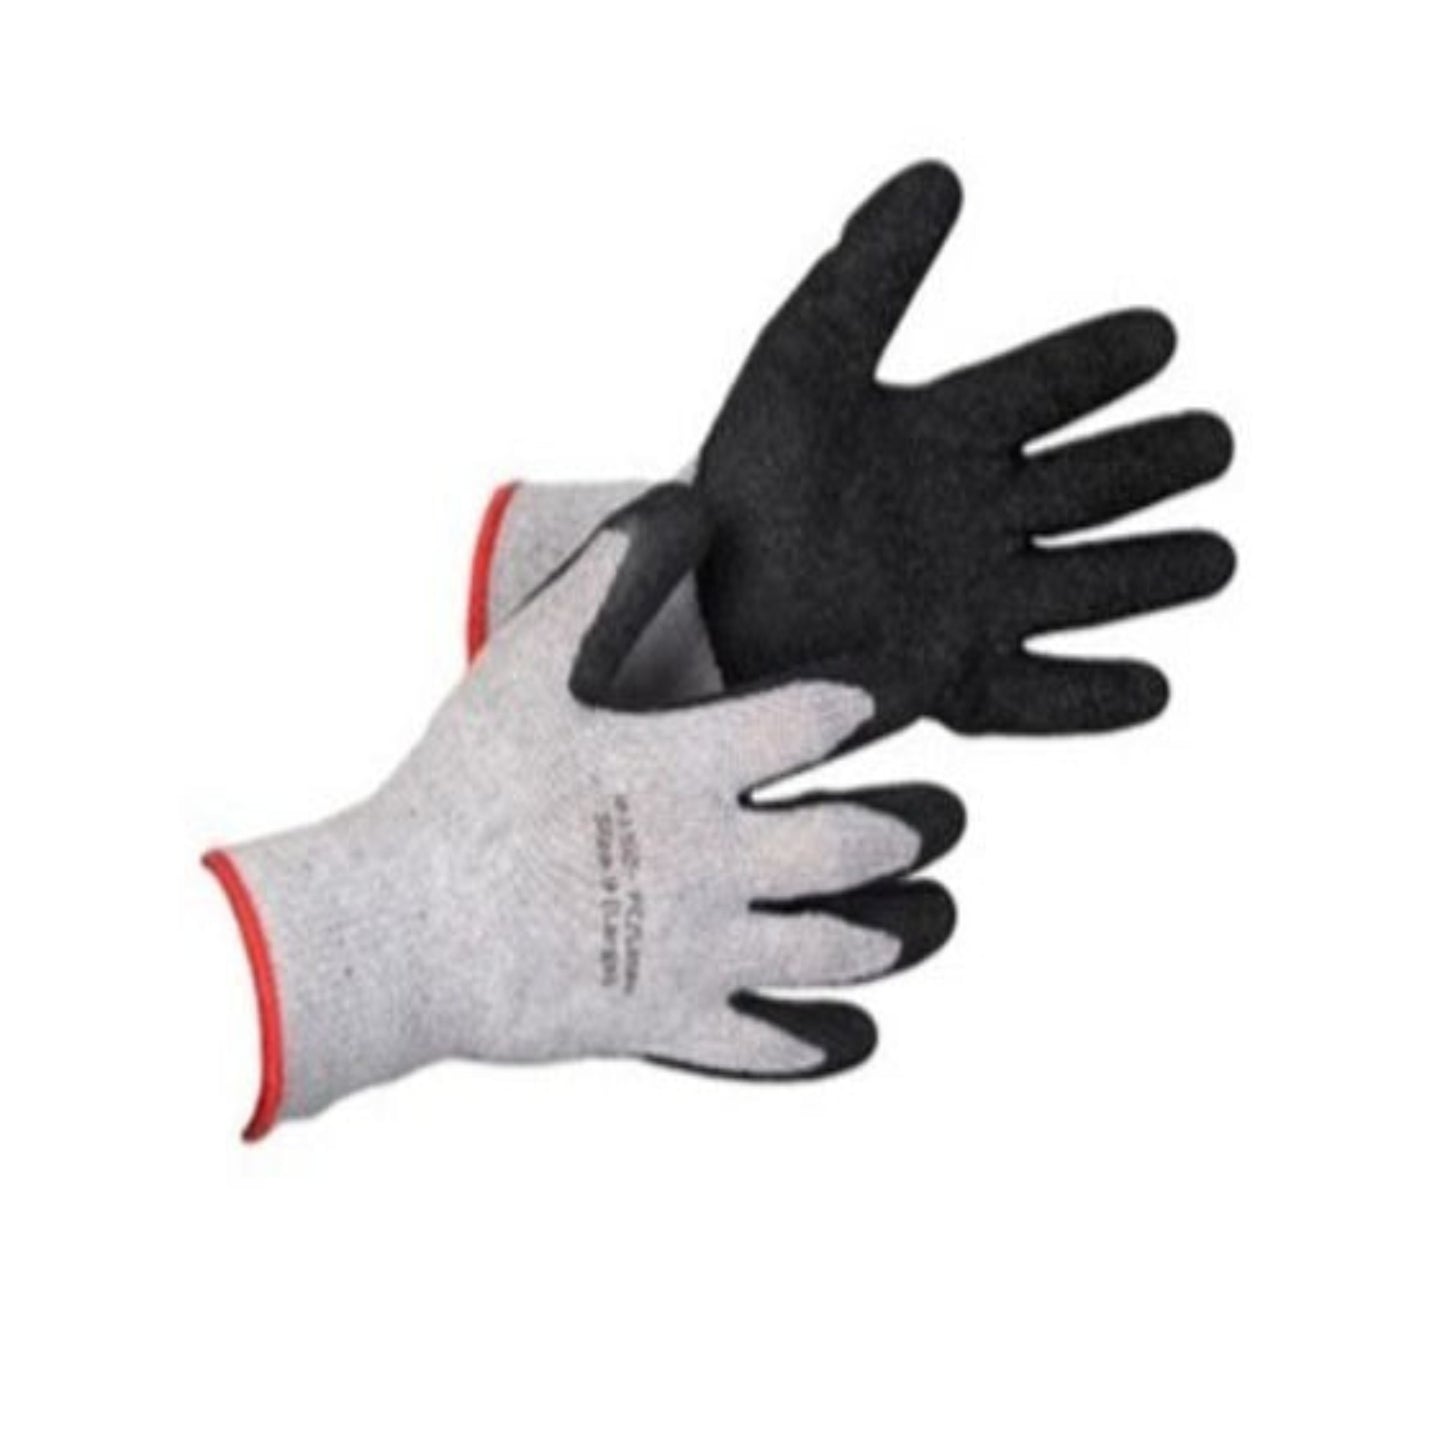 Polycotton Knit Latex Coated General Purpose Glove